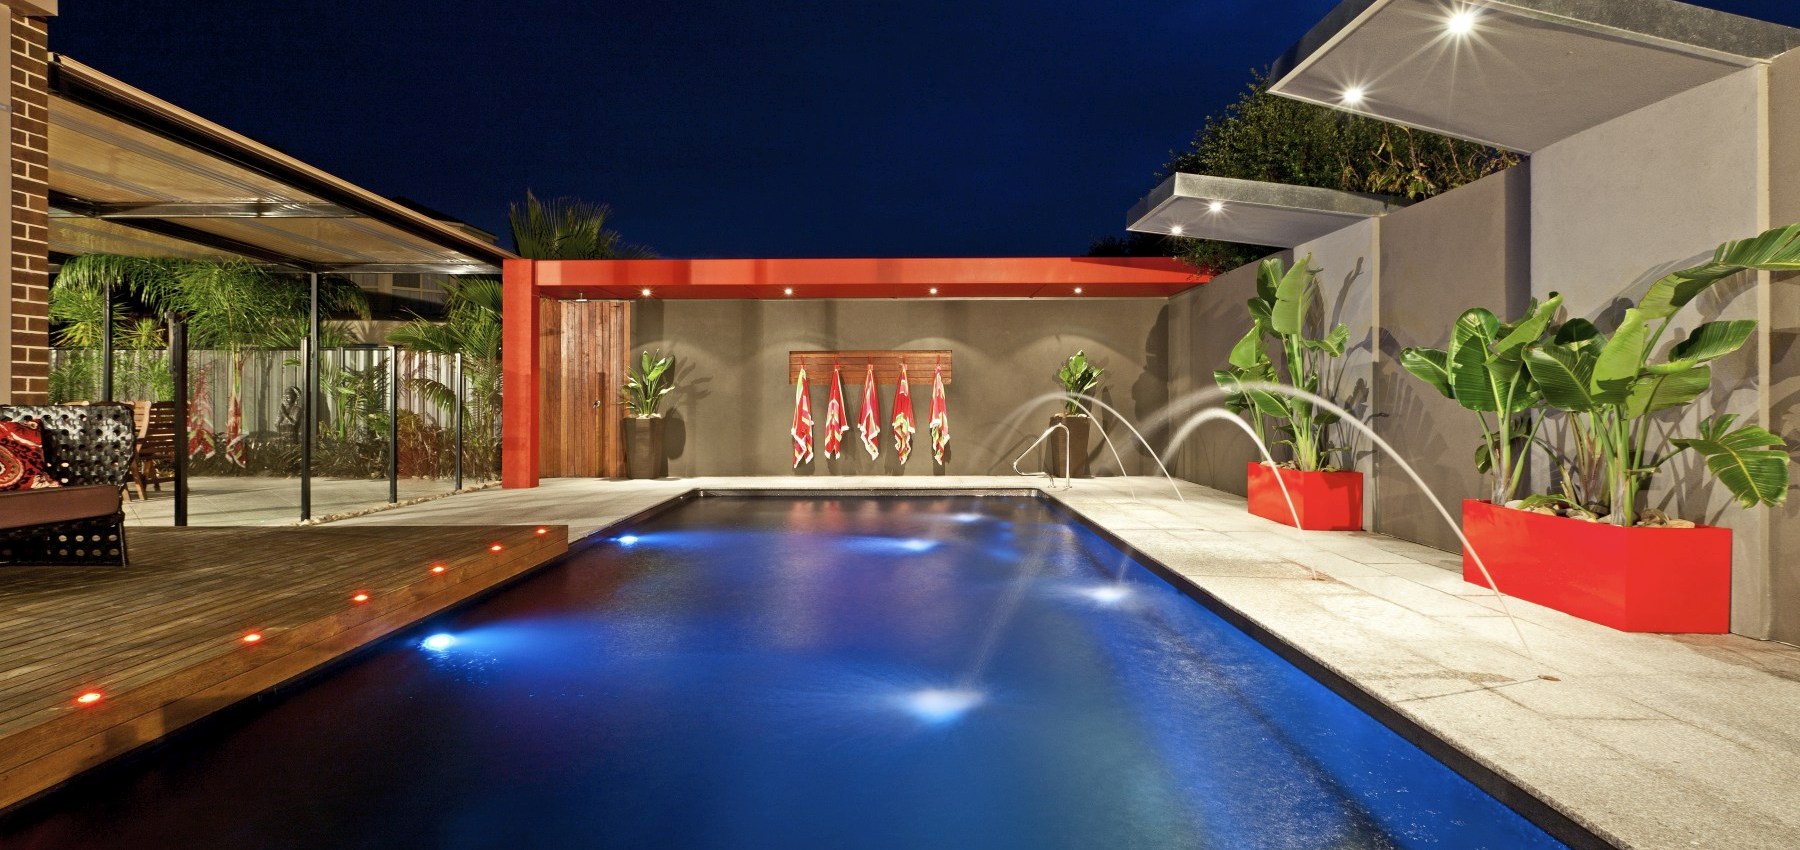 Flowless water flow with deck jets and underwater lights